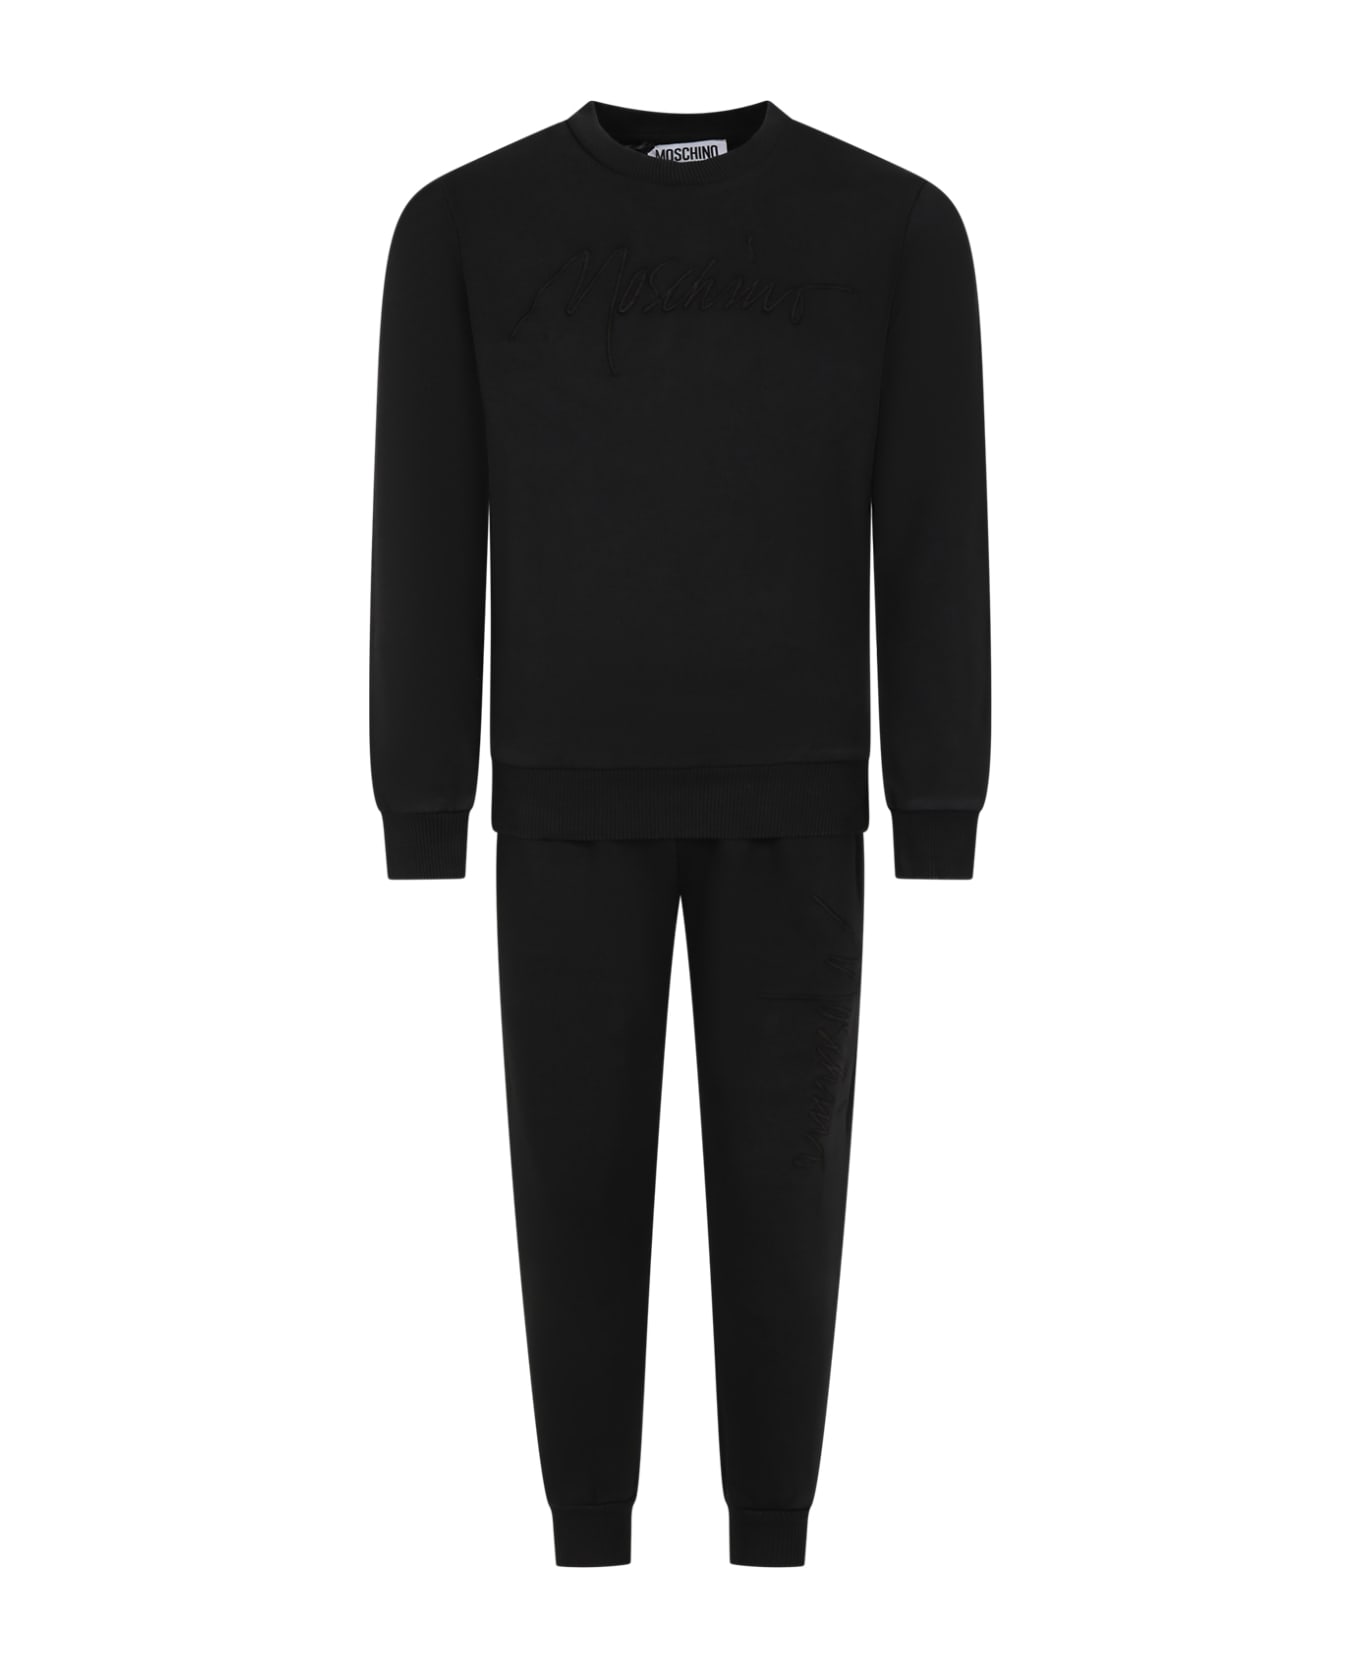 Moschino Black Tracksuit For Kids With Smiley - Black